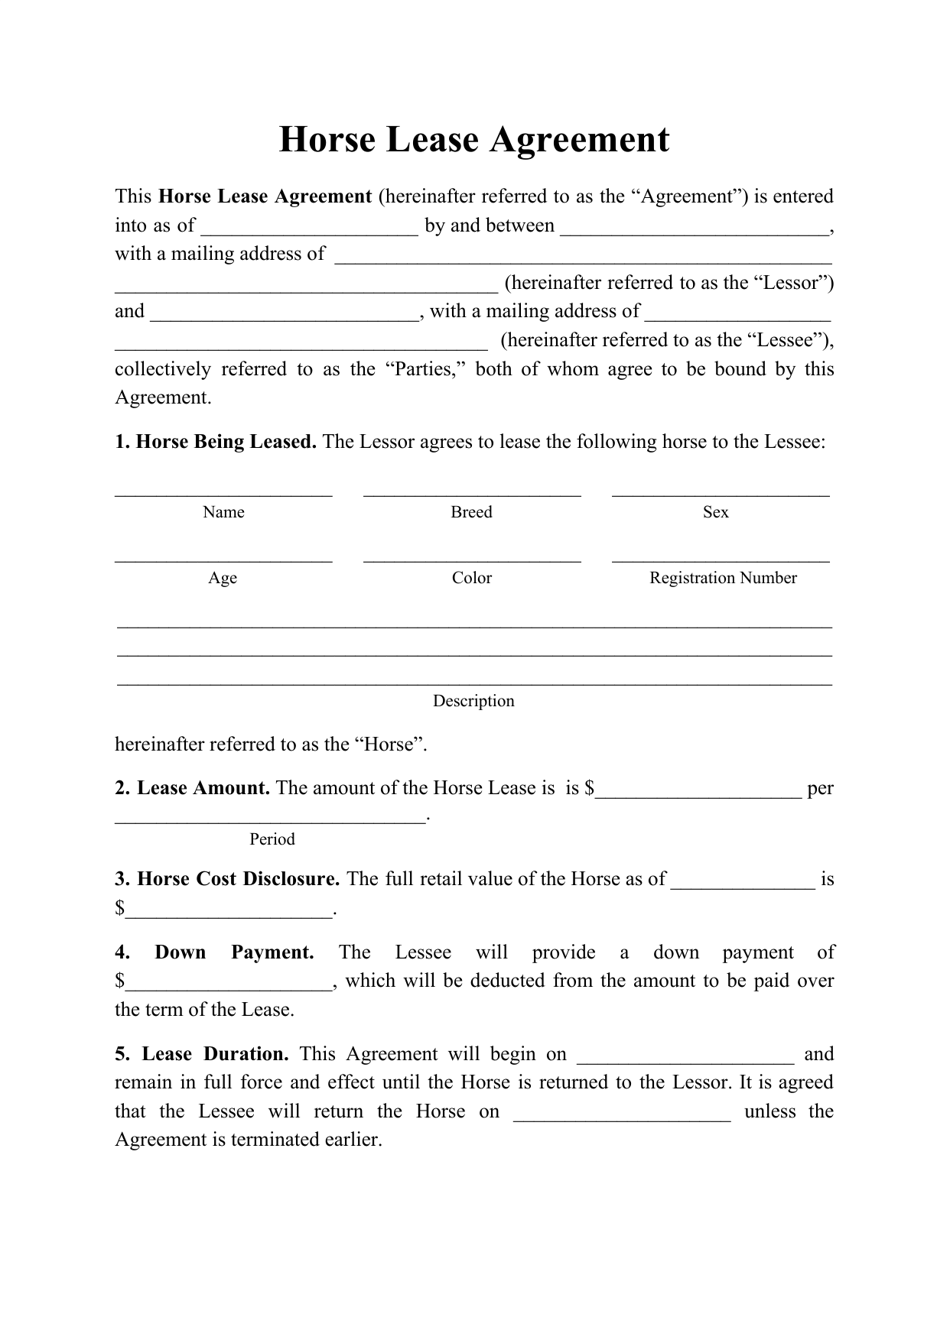 Horse Lease Agreement Template Fill Out Sign Online and Download PDF